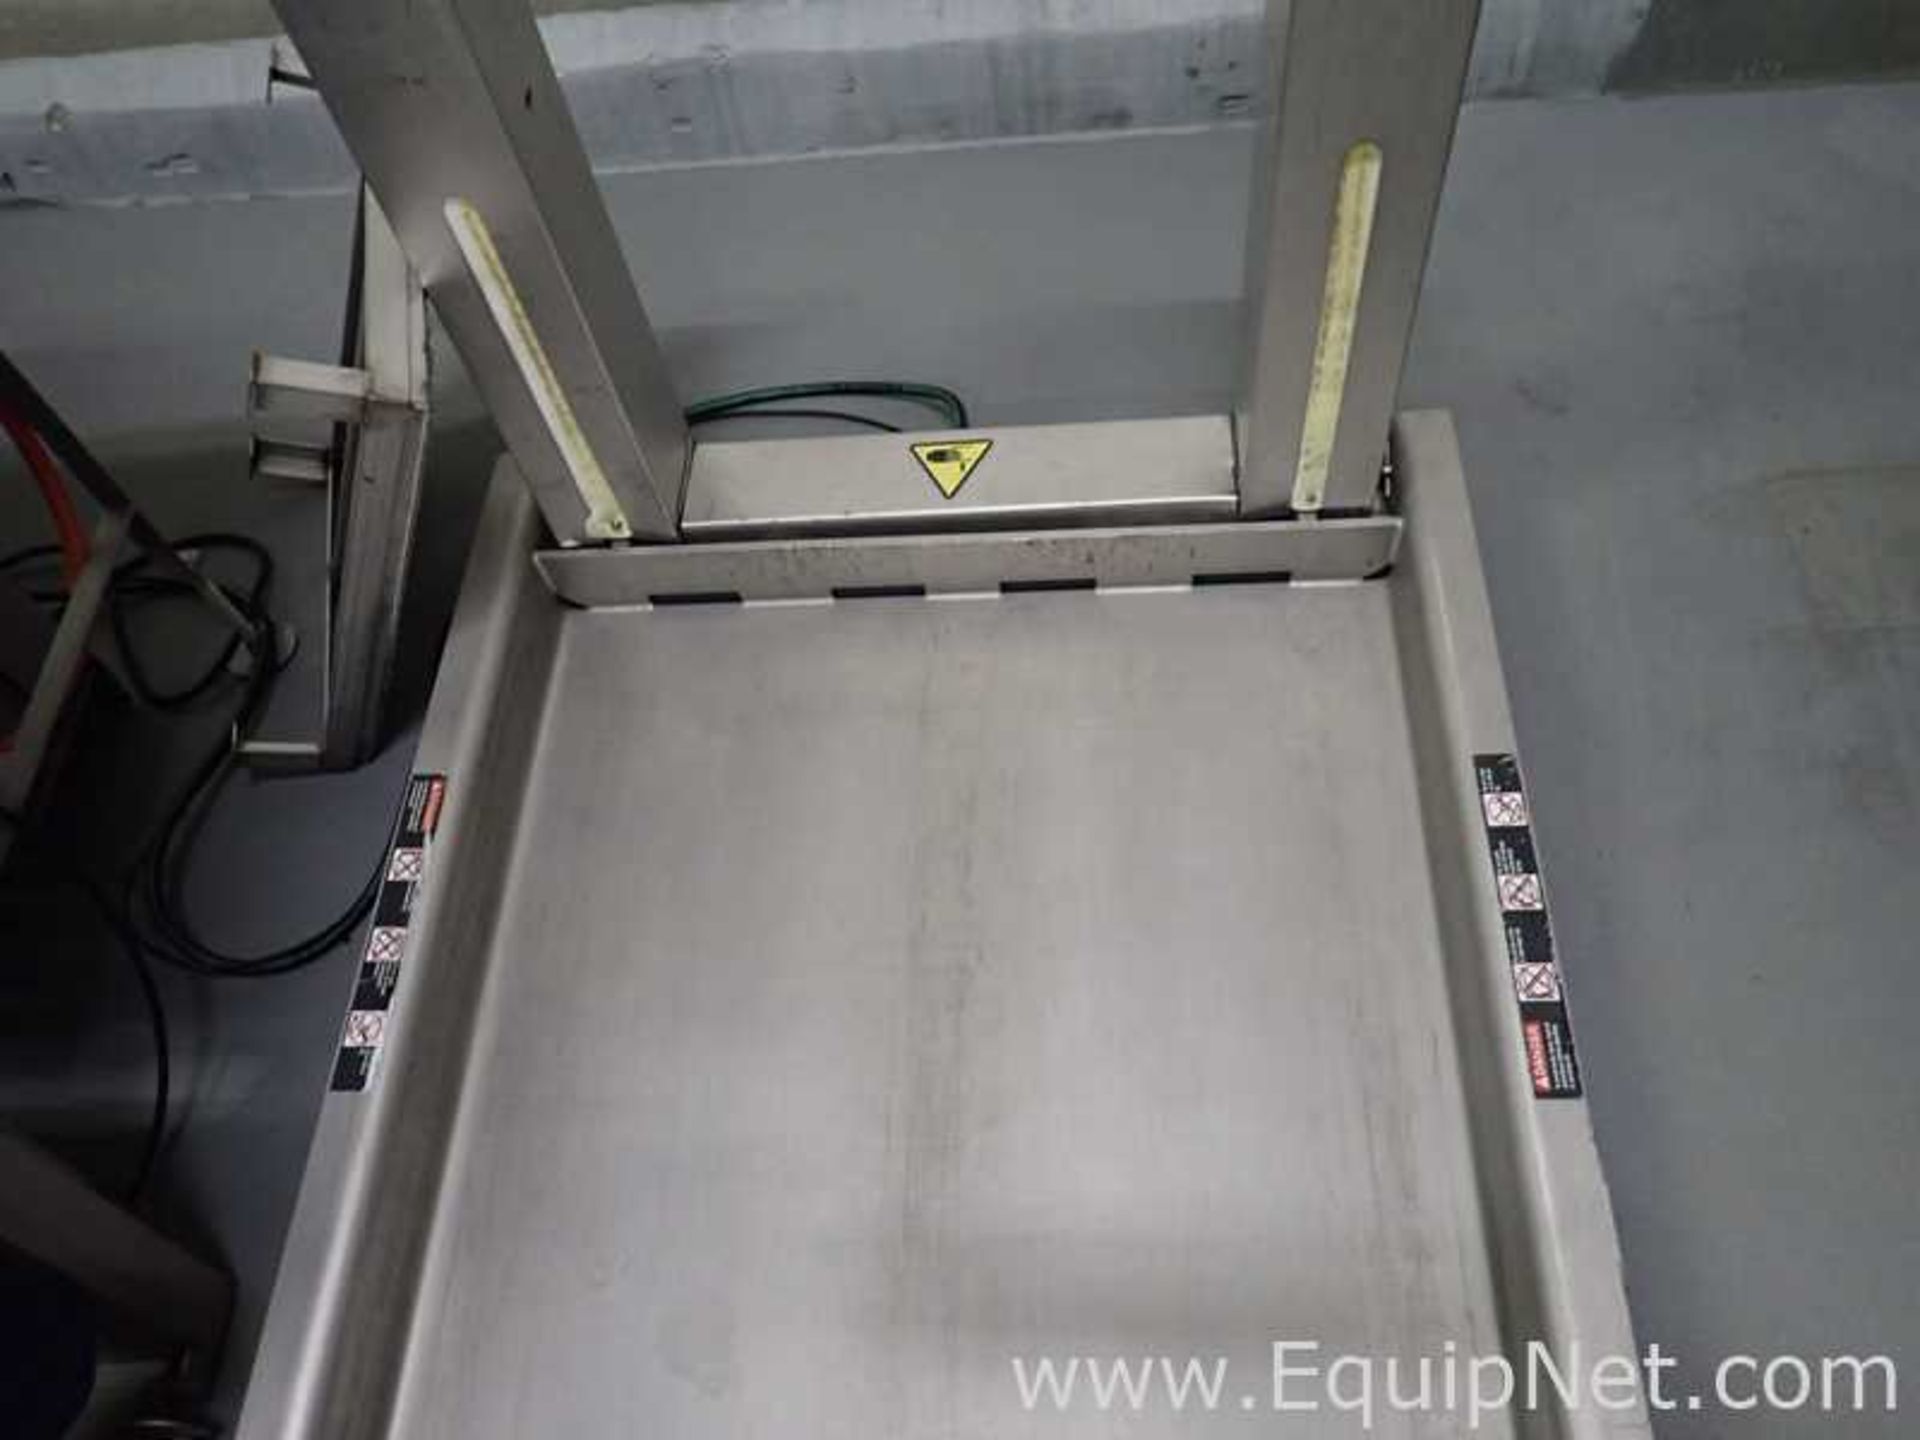 Stainless Steel Lift Table - Image 2 of 4